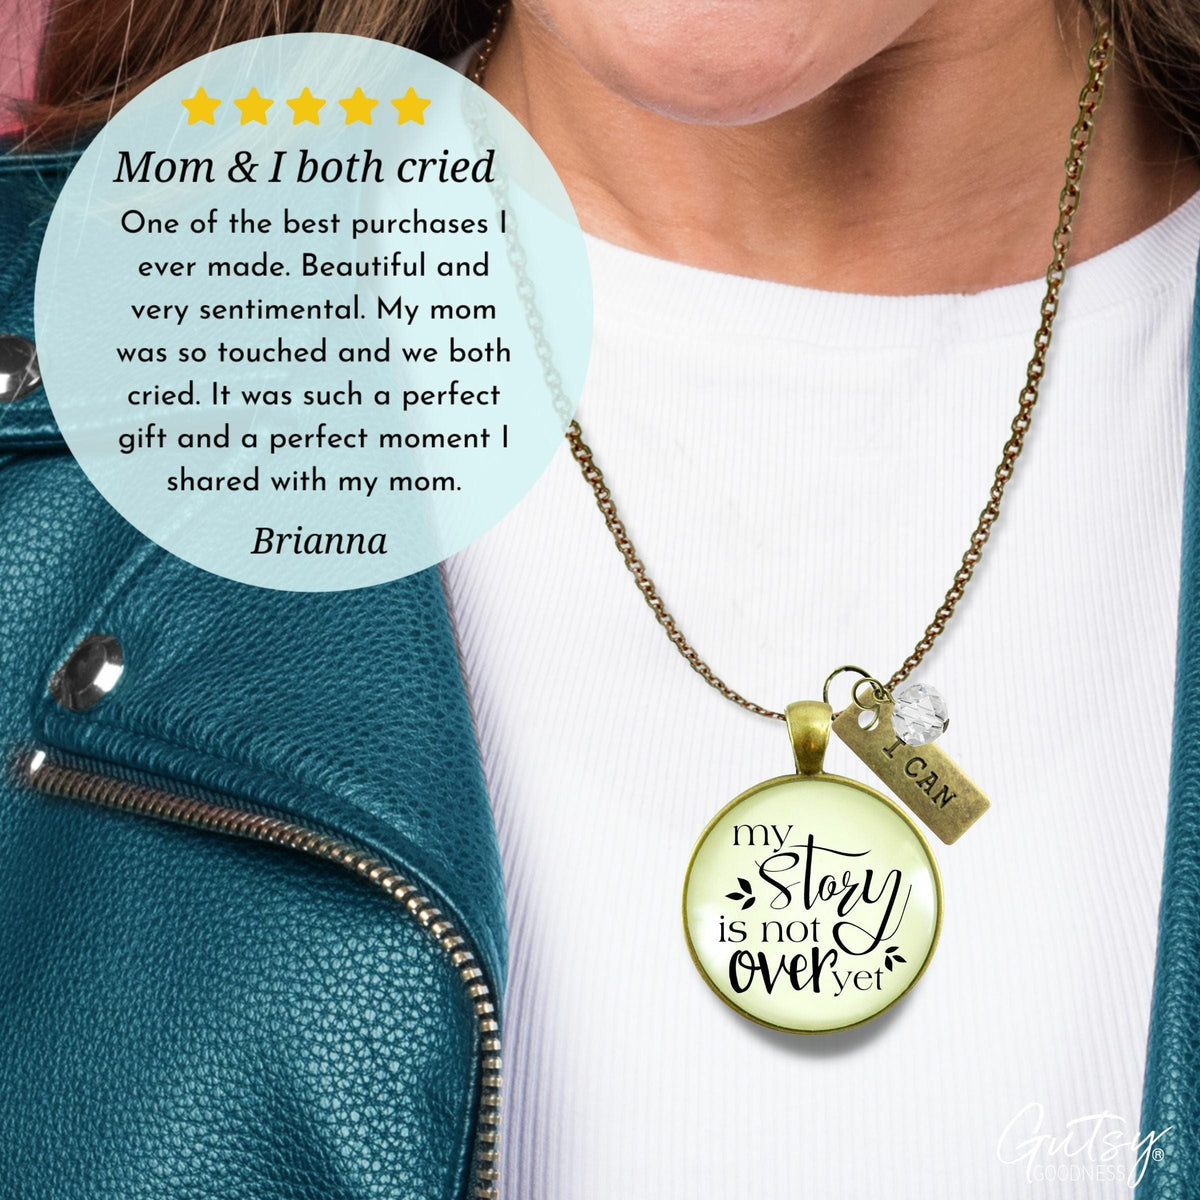 Gutsy Goodness My Story Isn't Over Yet Necklace Survivor Saying Warrior Jewelry Gift - Gutsy Goodness Handmade Jewelry;My Story Isn't Over Yet Necklace Survivor Saying Warrior Jewelry Gift - Gutsy Goodness Handmade Jewelry Gifts